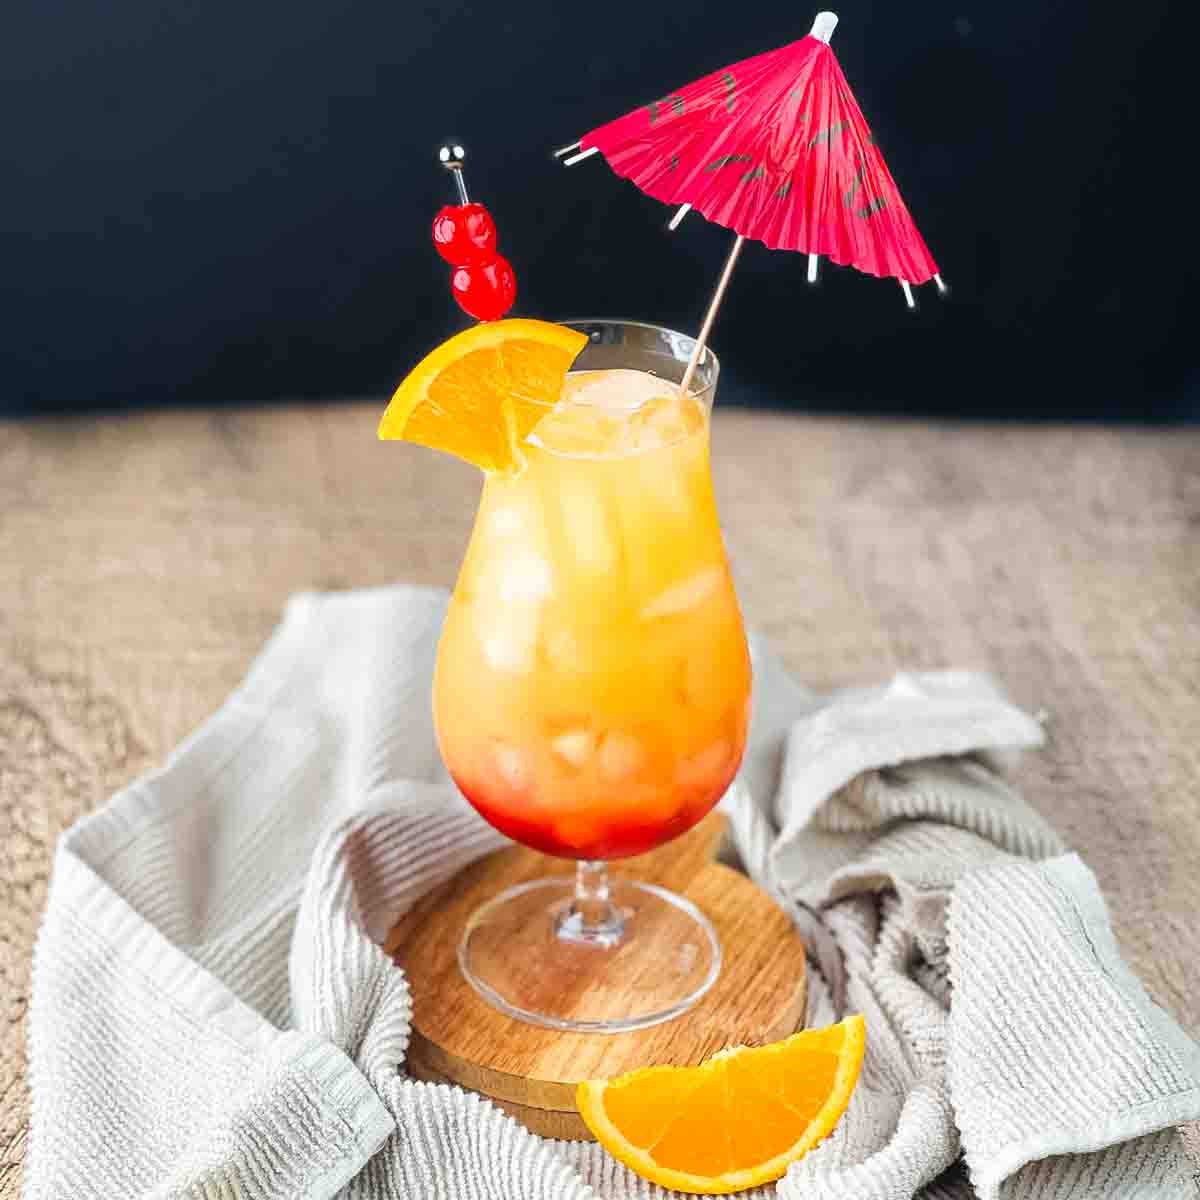 The sunset cocktail in a hurricane glass garnished with an orange wedge, cherries, and an umbrella.